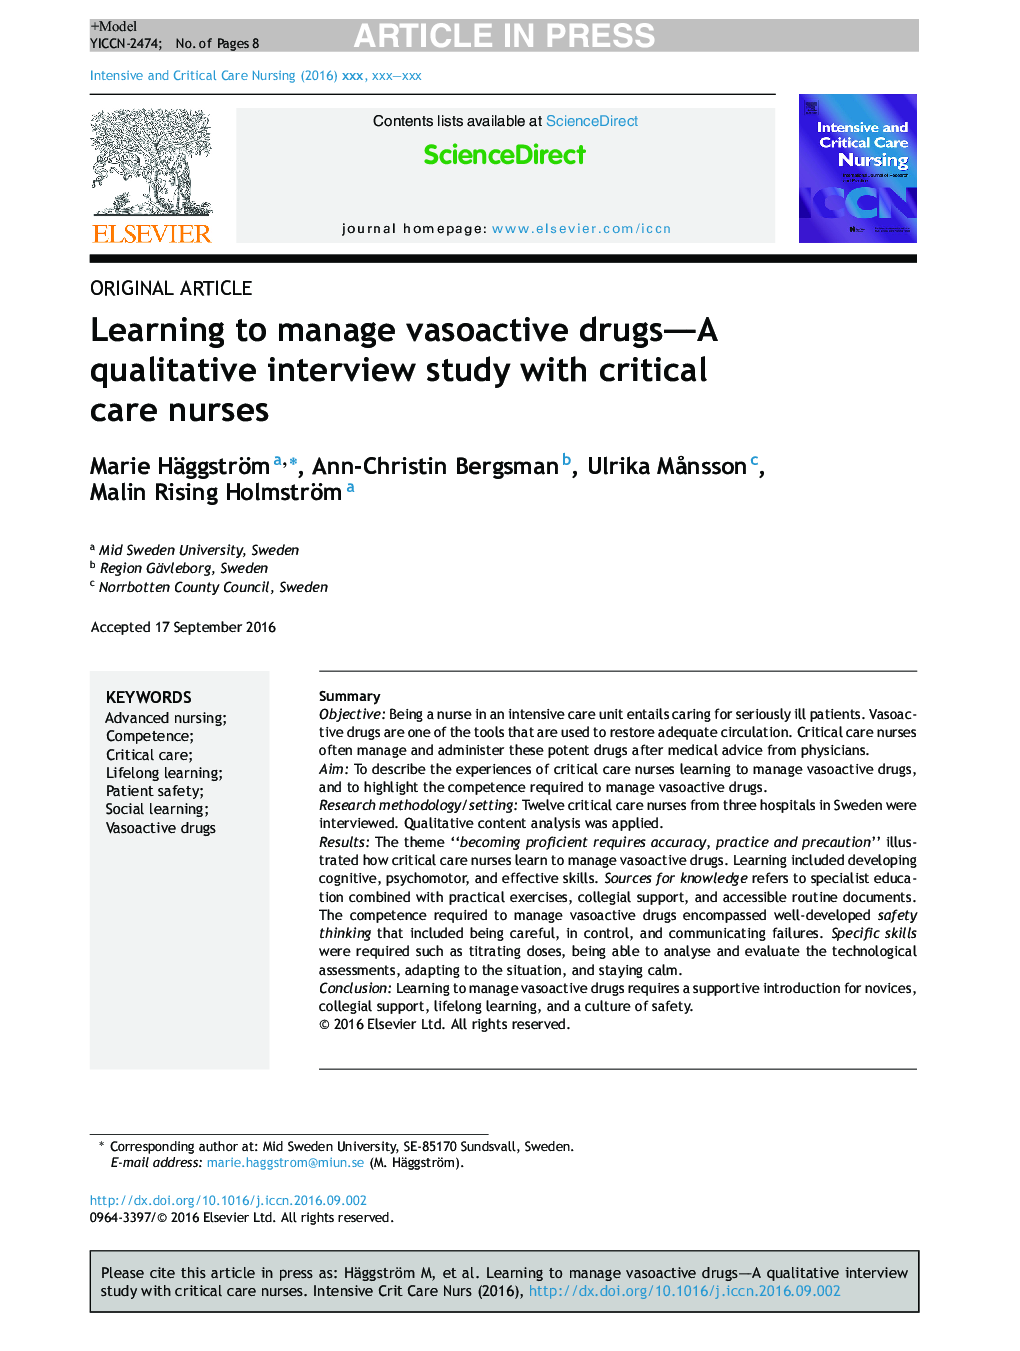 Learning to manage vasoactive drugs-A qualitative interview study with critical care nurses